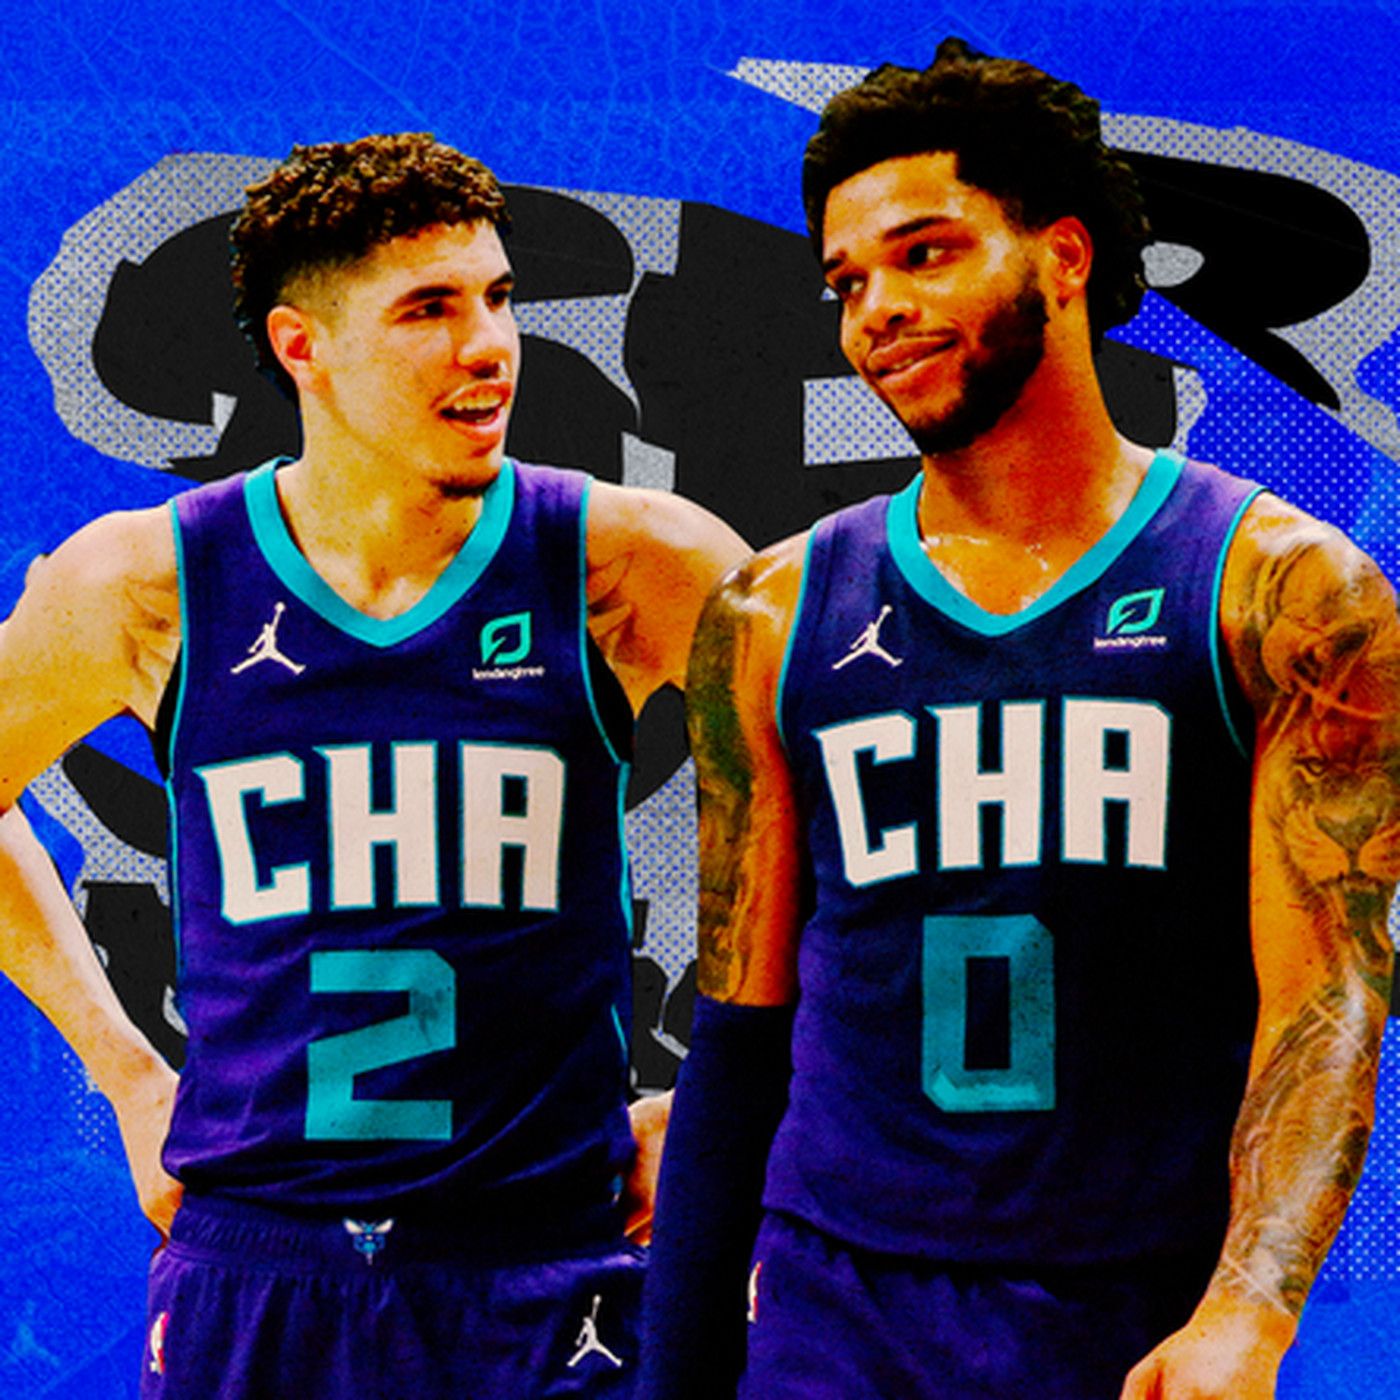 LaMelo Ball is unlocking Miles Bridges' potential with the Hornets